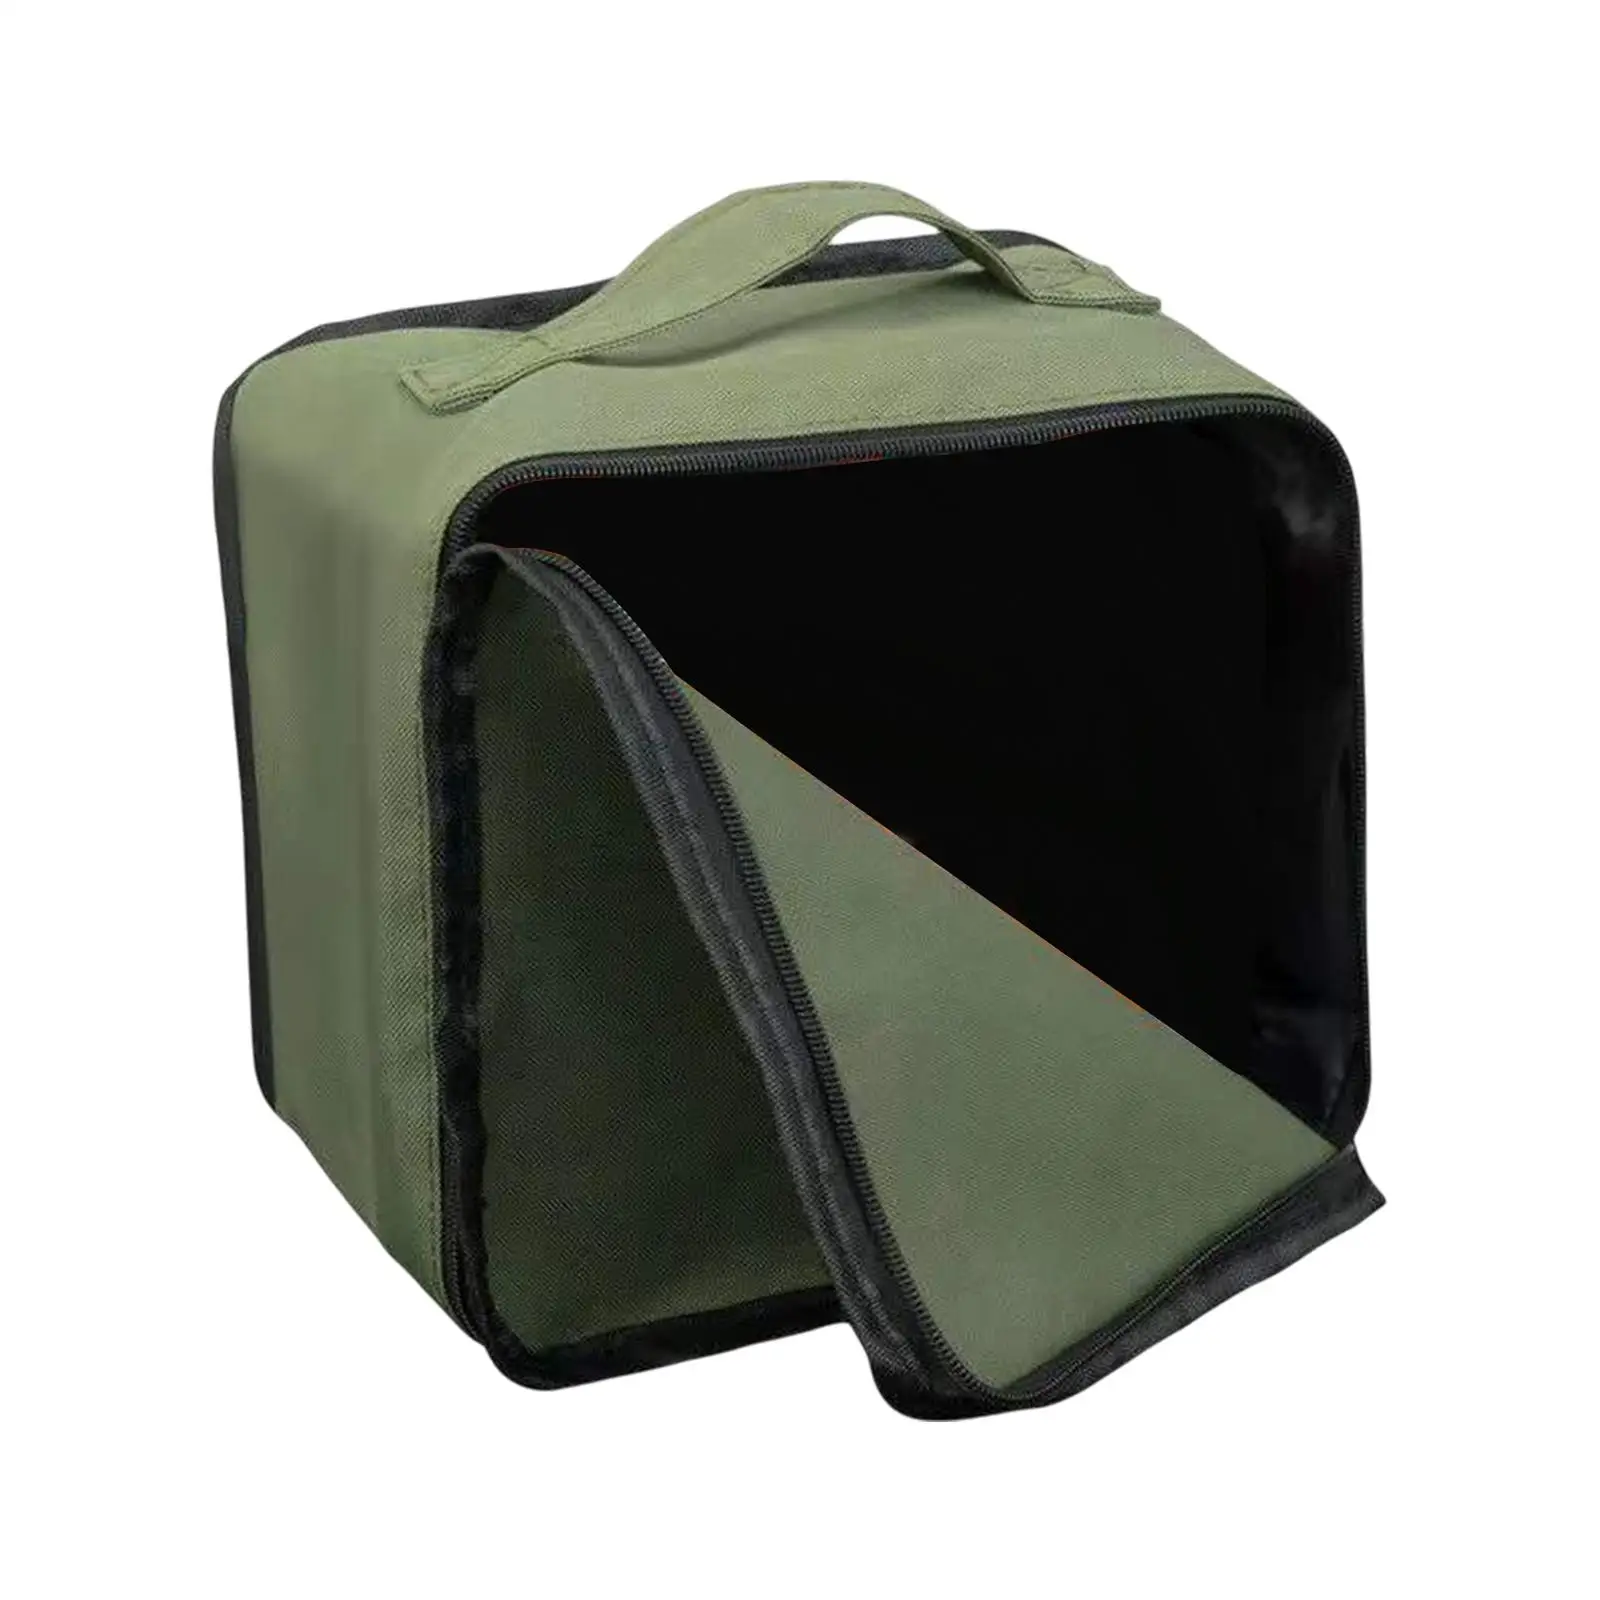 Portable Gas Tank Storage Bags Easy to Carry Utensils Bag Tool Bag for Hiking Picnic